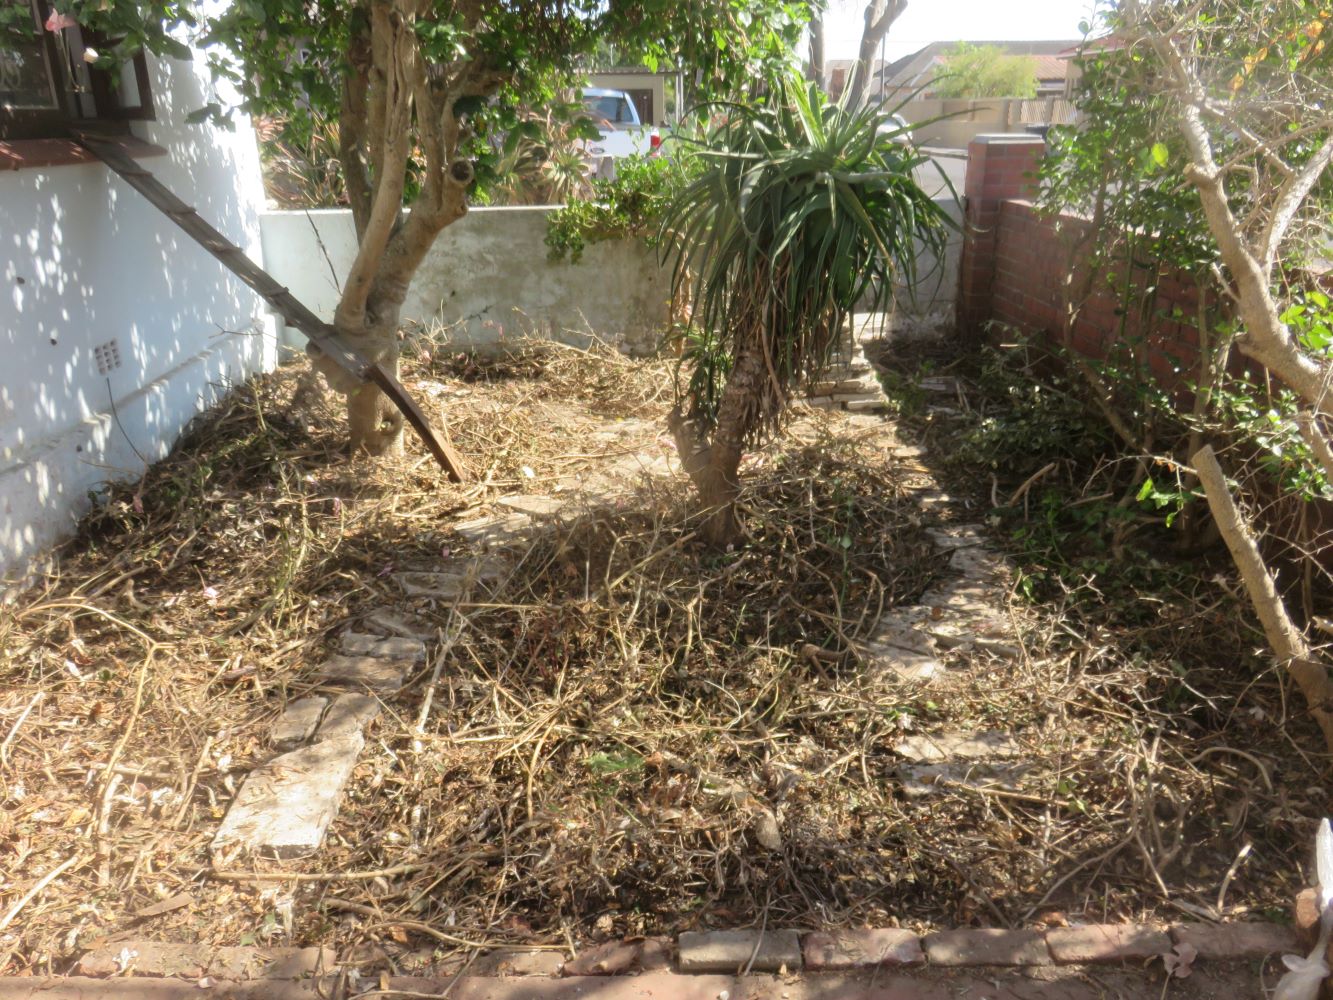 On the way to healthy soil I hope. The front garden after sowing cover crops, mulching and covering with sticks to stop birds and cats scratching out the seeds.